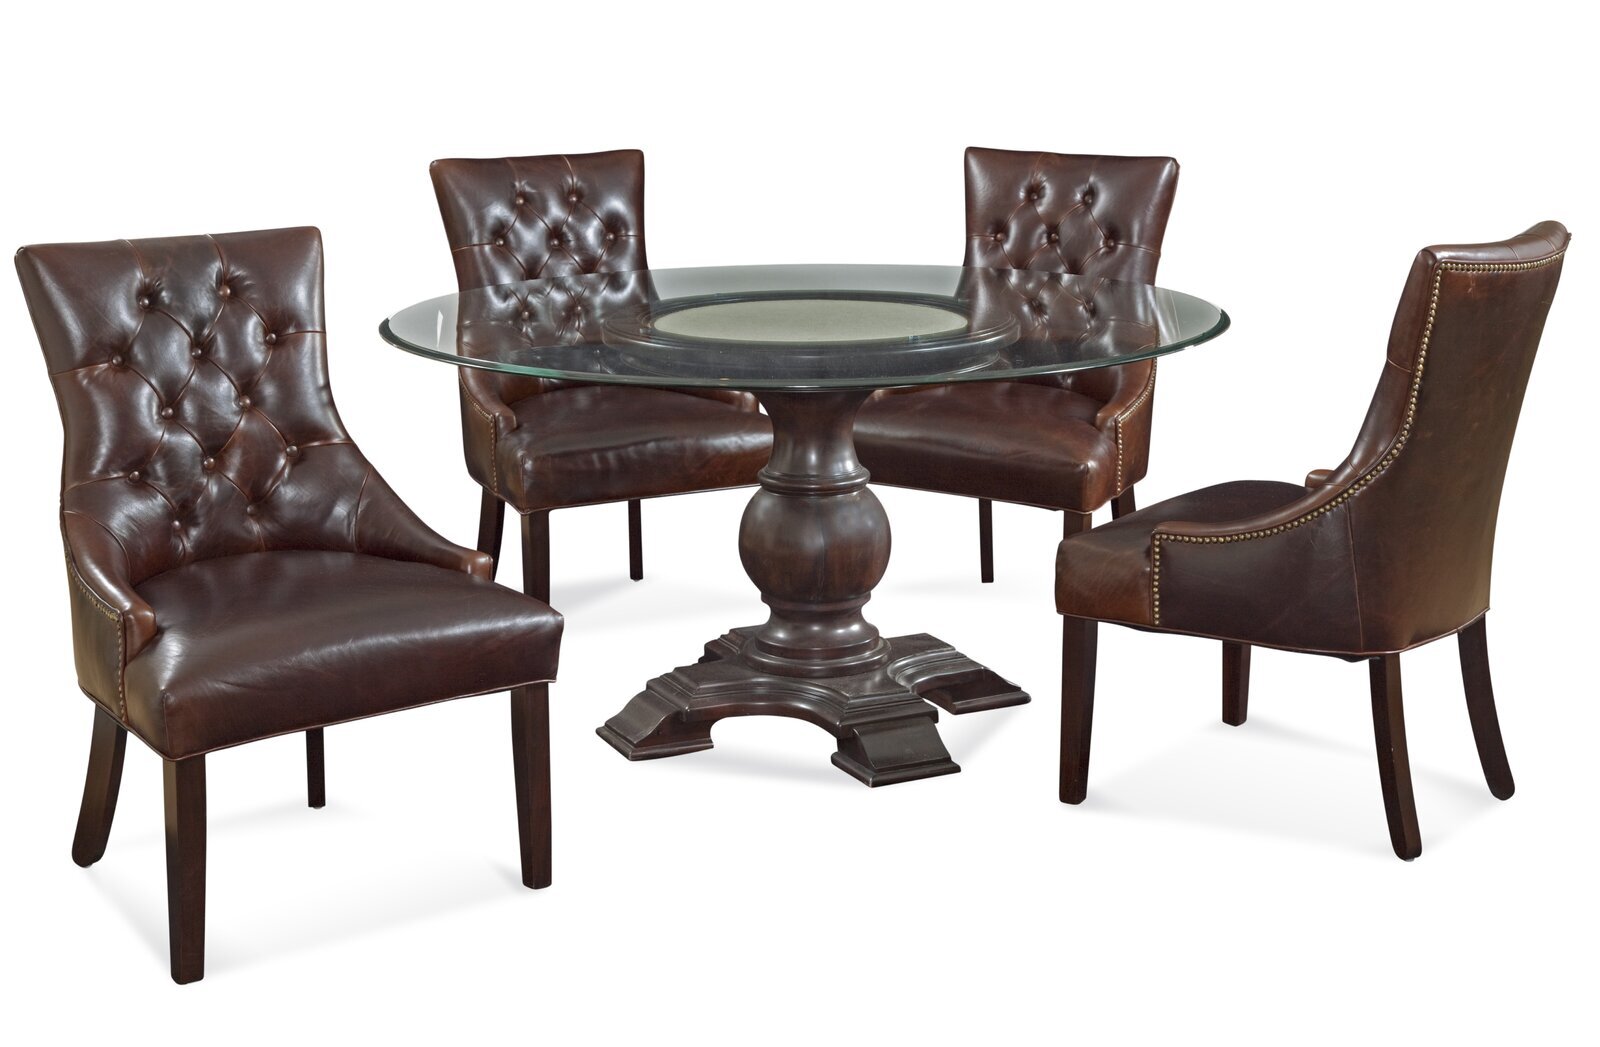 A poker inspired round glass dining set with traditional charm